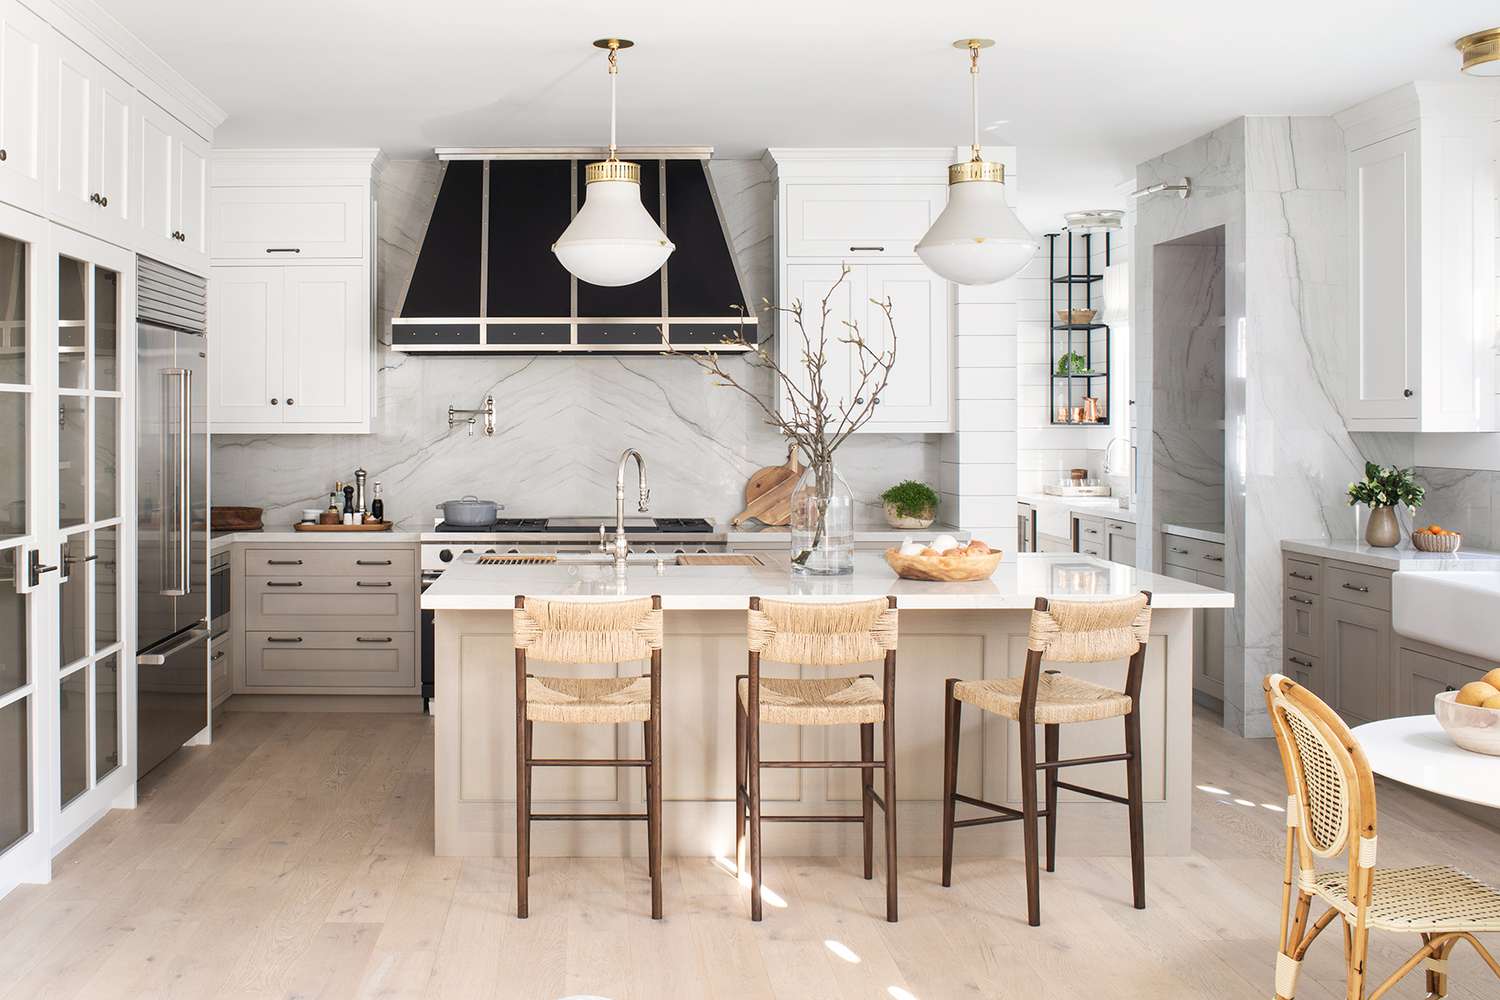 What Kitchen Trends Are Going Out of Style 